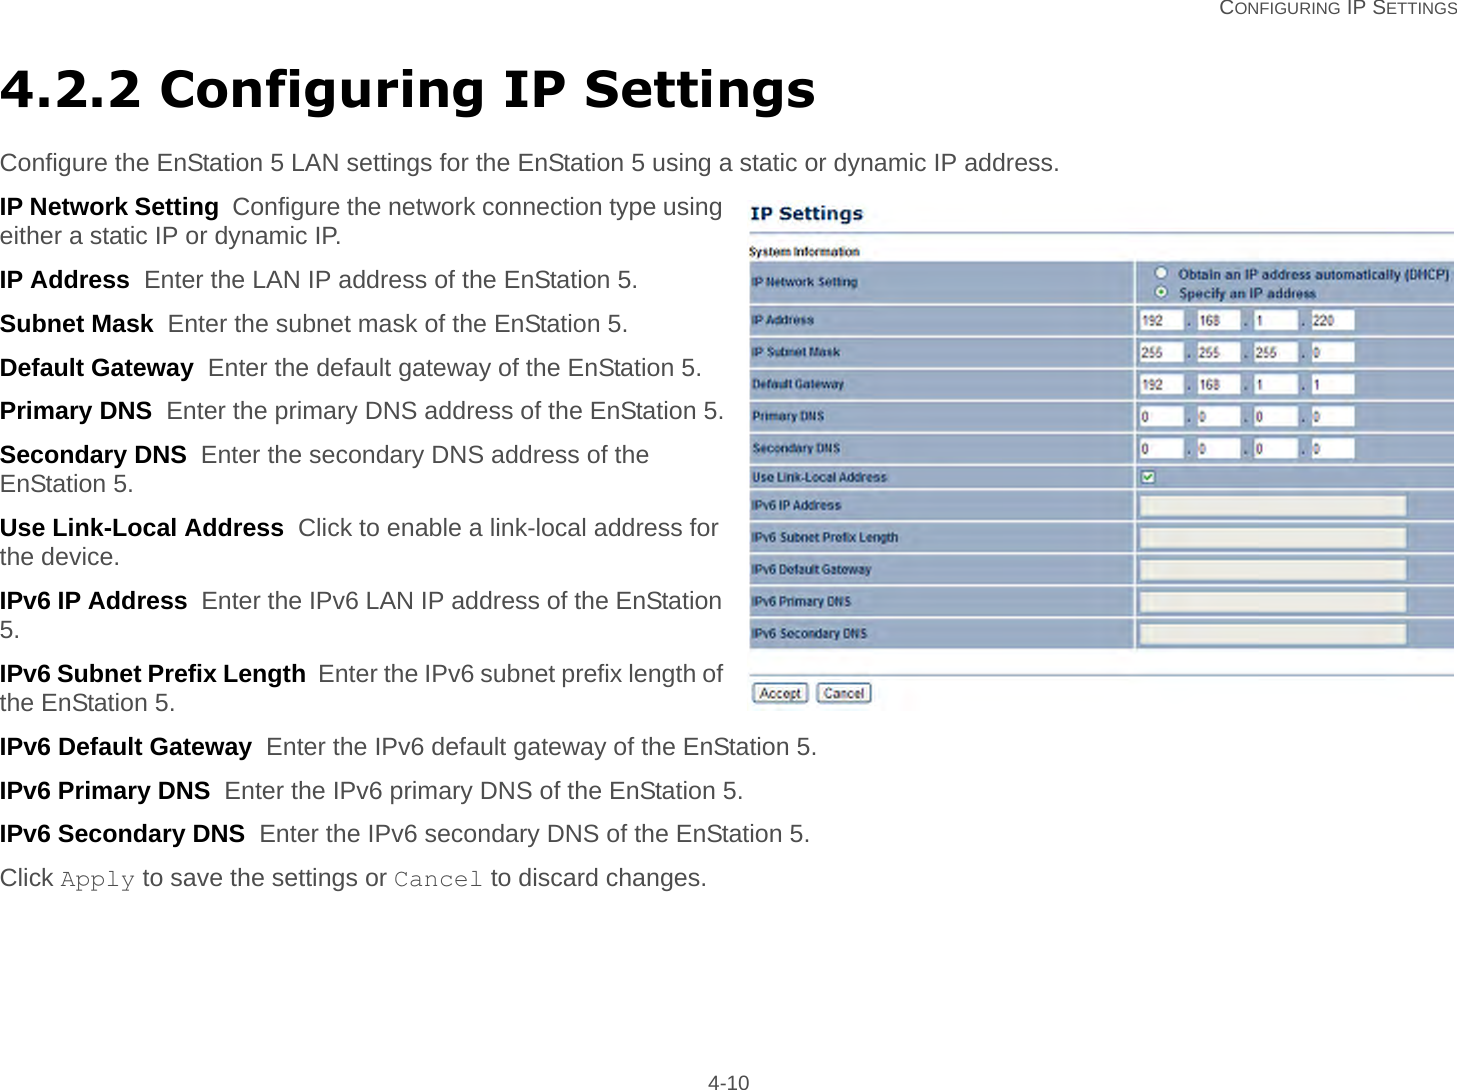   CONFIGURING IP SETTINGS 4-104.2.2 Configuring IP SettingsConfigure the EnStation 5 LAN settings for the EnStation 5 using a static or dynamic IP address.IP Network Setting  Configure the network connection type using either a static IP or dynamic IP.IP Address  Enter the LAN IP address of the EnStation 5.Subnet Mask  Enter the subnet mask of the EnStation 5.Default Gateway  Enter the default gateway of the EnStation 5.Primary DNS  Enter the primary DNS address of the EnStation 5.Secondary DNS  Enter the secondary DNS address of the EnStation 5.Use Link-Local Address  Click to enable a link-local address for the device.IPv6 IP Address  Enter the IPv6 LAN IP address of the EnStation 5.IPv6 Subnet Prefix Length  Enter the IPv6 subnet prefix length of the EnStation 5.IPv6 Default Gateway  Enter the IPv6 default gateway of the EnStation 5.IPv6 Primary DNS  Enter the IPv6 primary DNS of the EnStation 5.IPv6 Secondary DNS  Enter the IPv6 secondary DNS of the EnStation 5.Click Apply to save the settings or Cancel to discard changes.